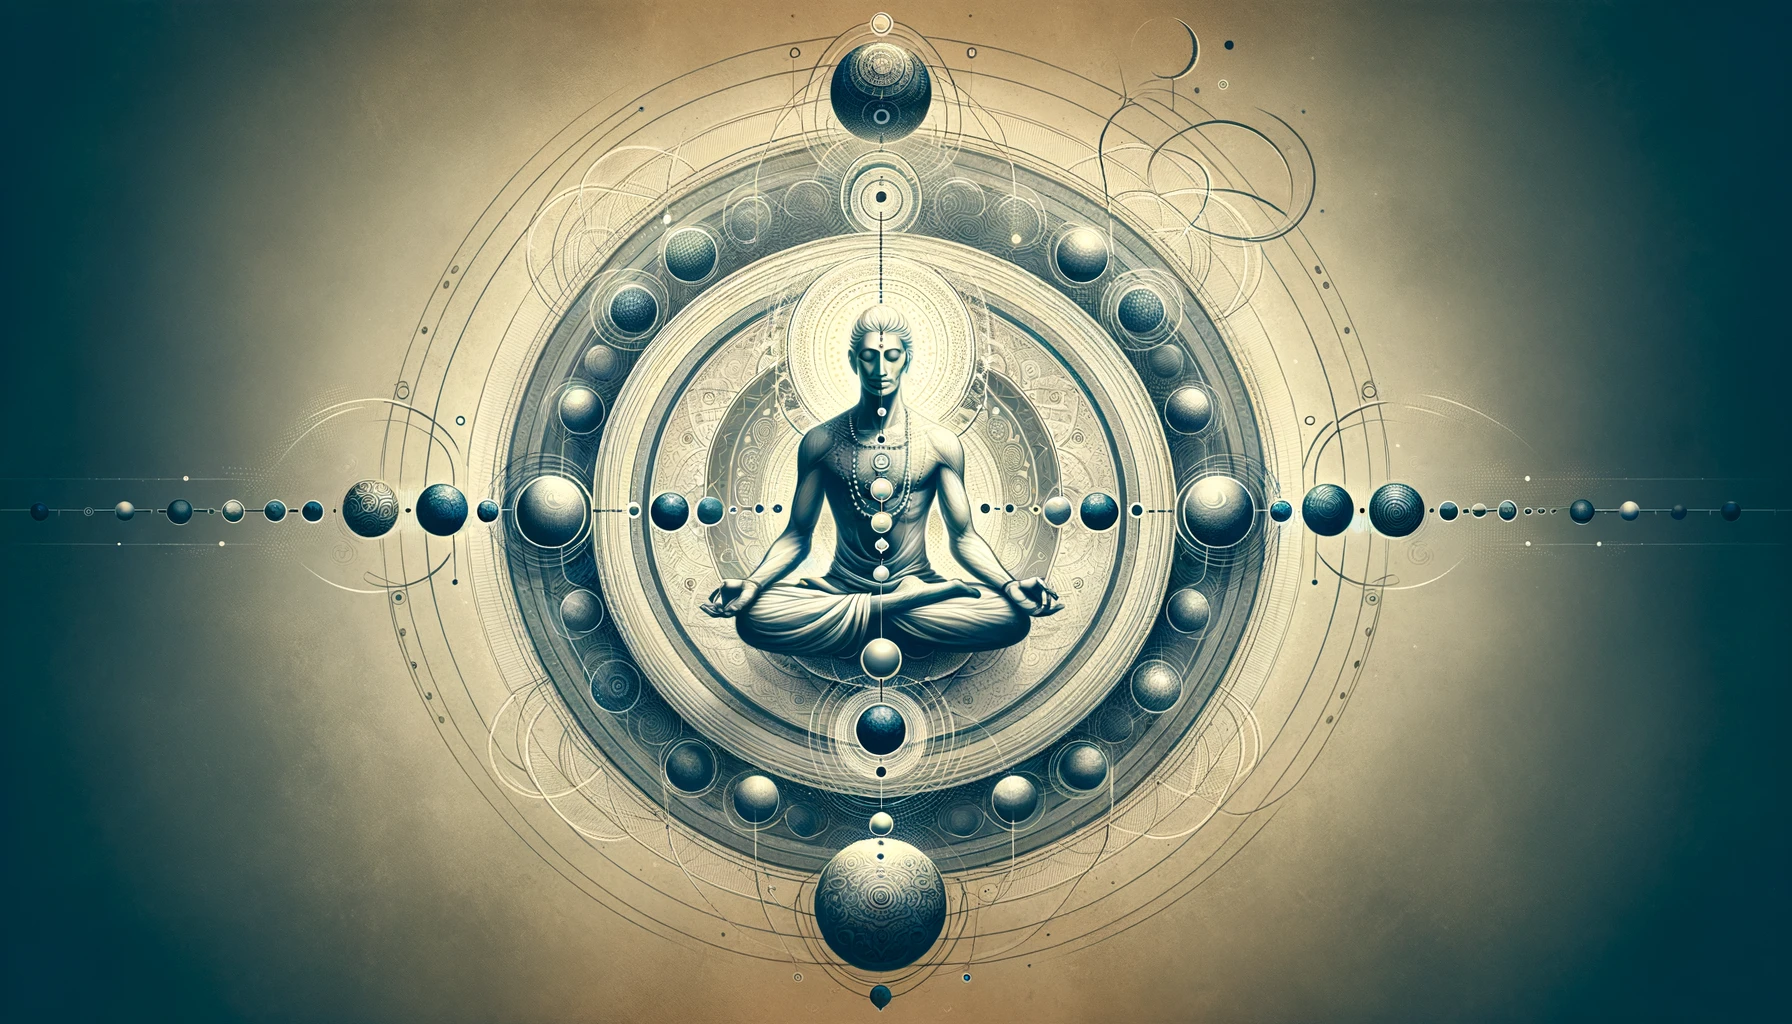 DALL·E 2024-02-04 13.52.54 - Create an image of a holy person in meditation, surrounded by circles that represent balance and the interplay of opposites. The holy person should be